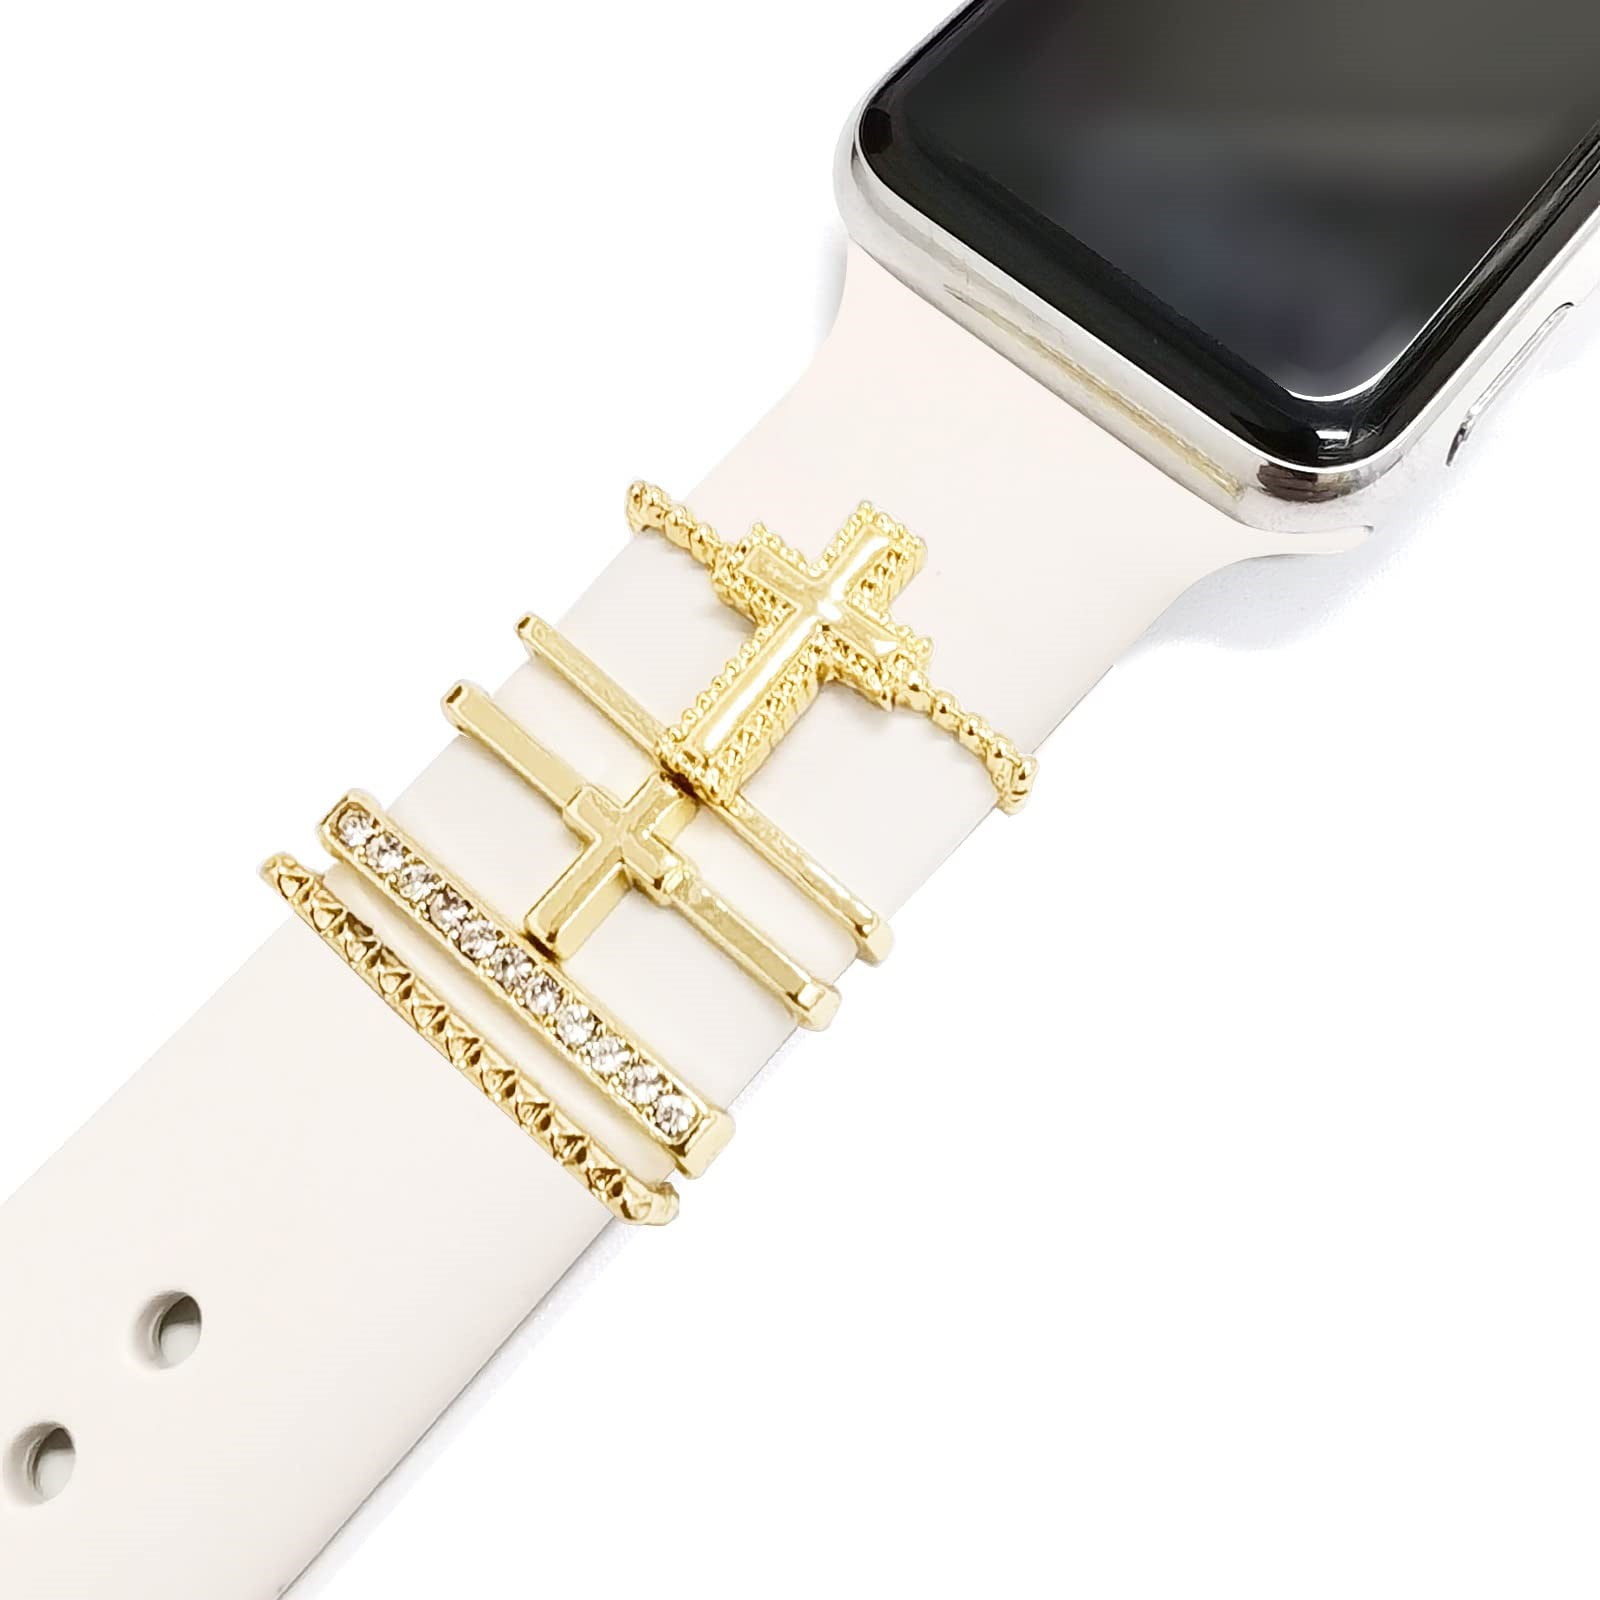 ALMNVO Decoration for Strap for Apple Watch Band for 20/22mm Watch